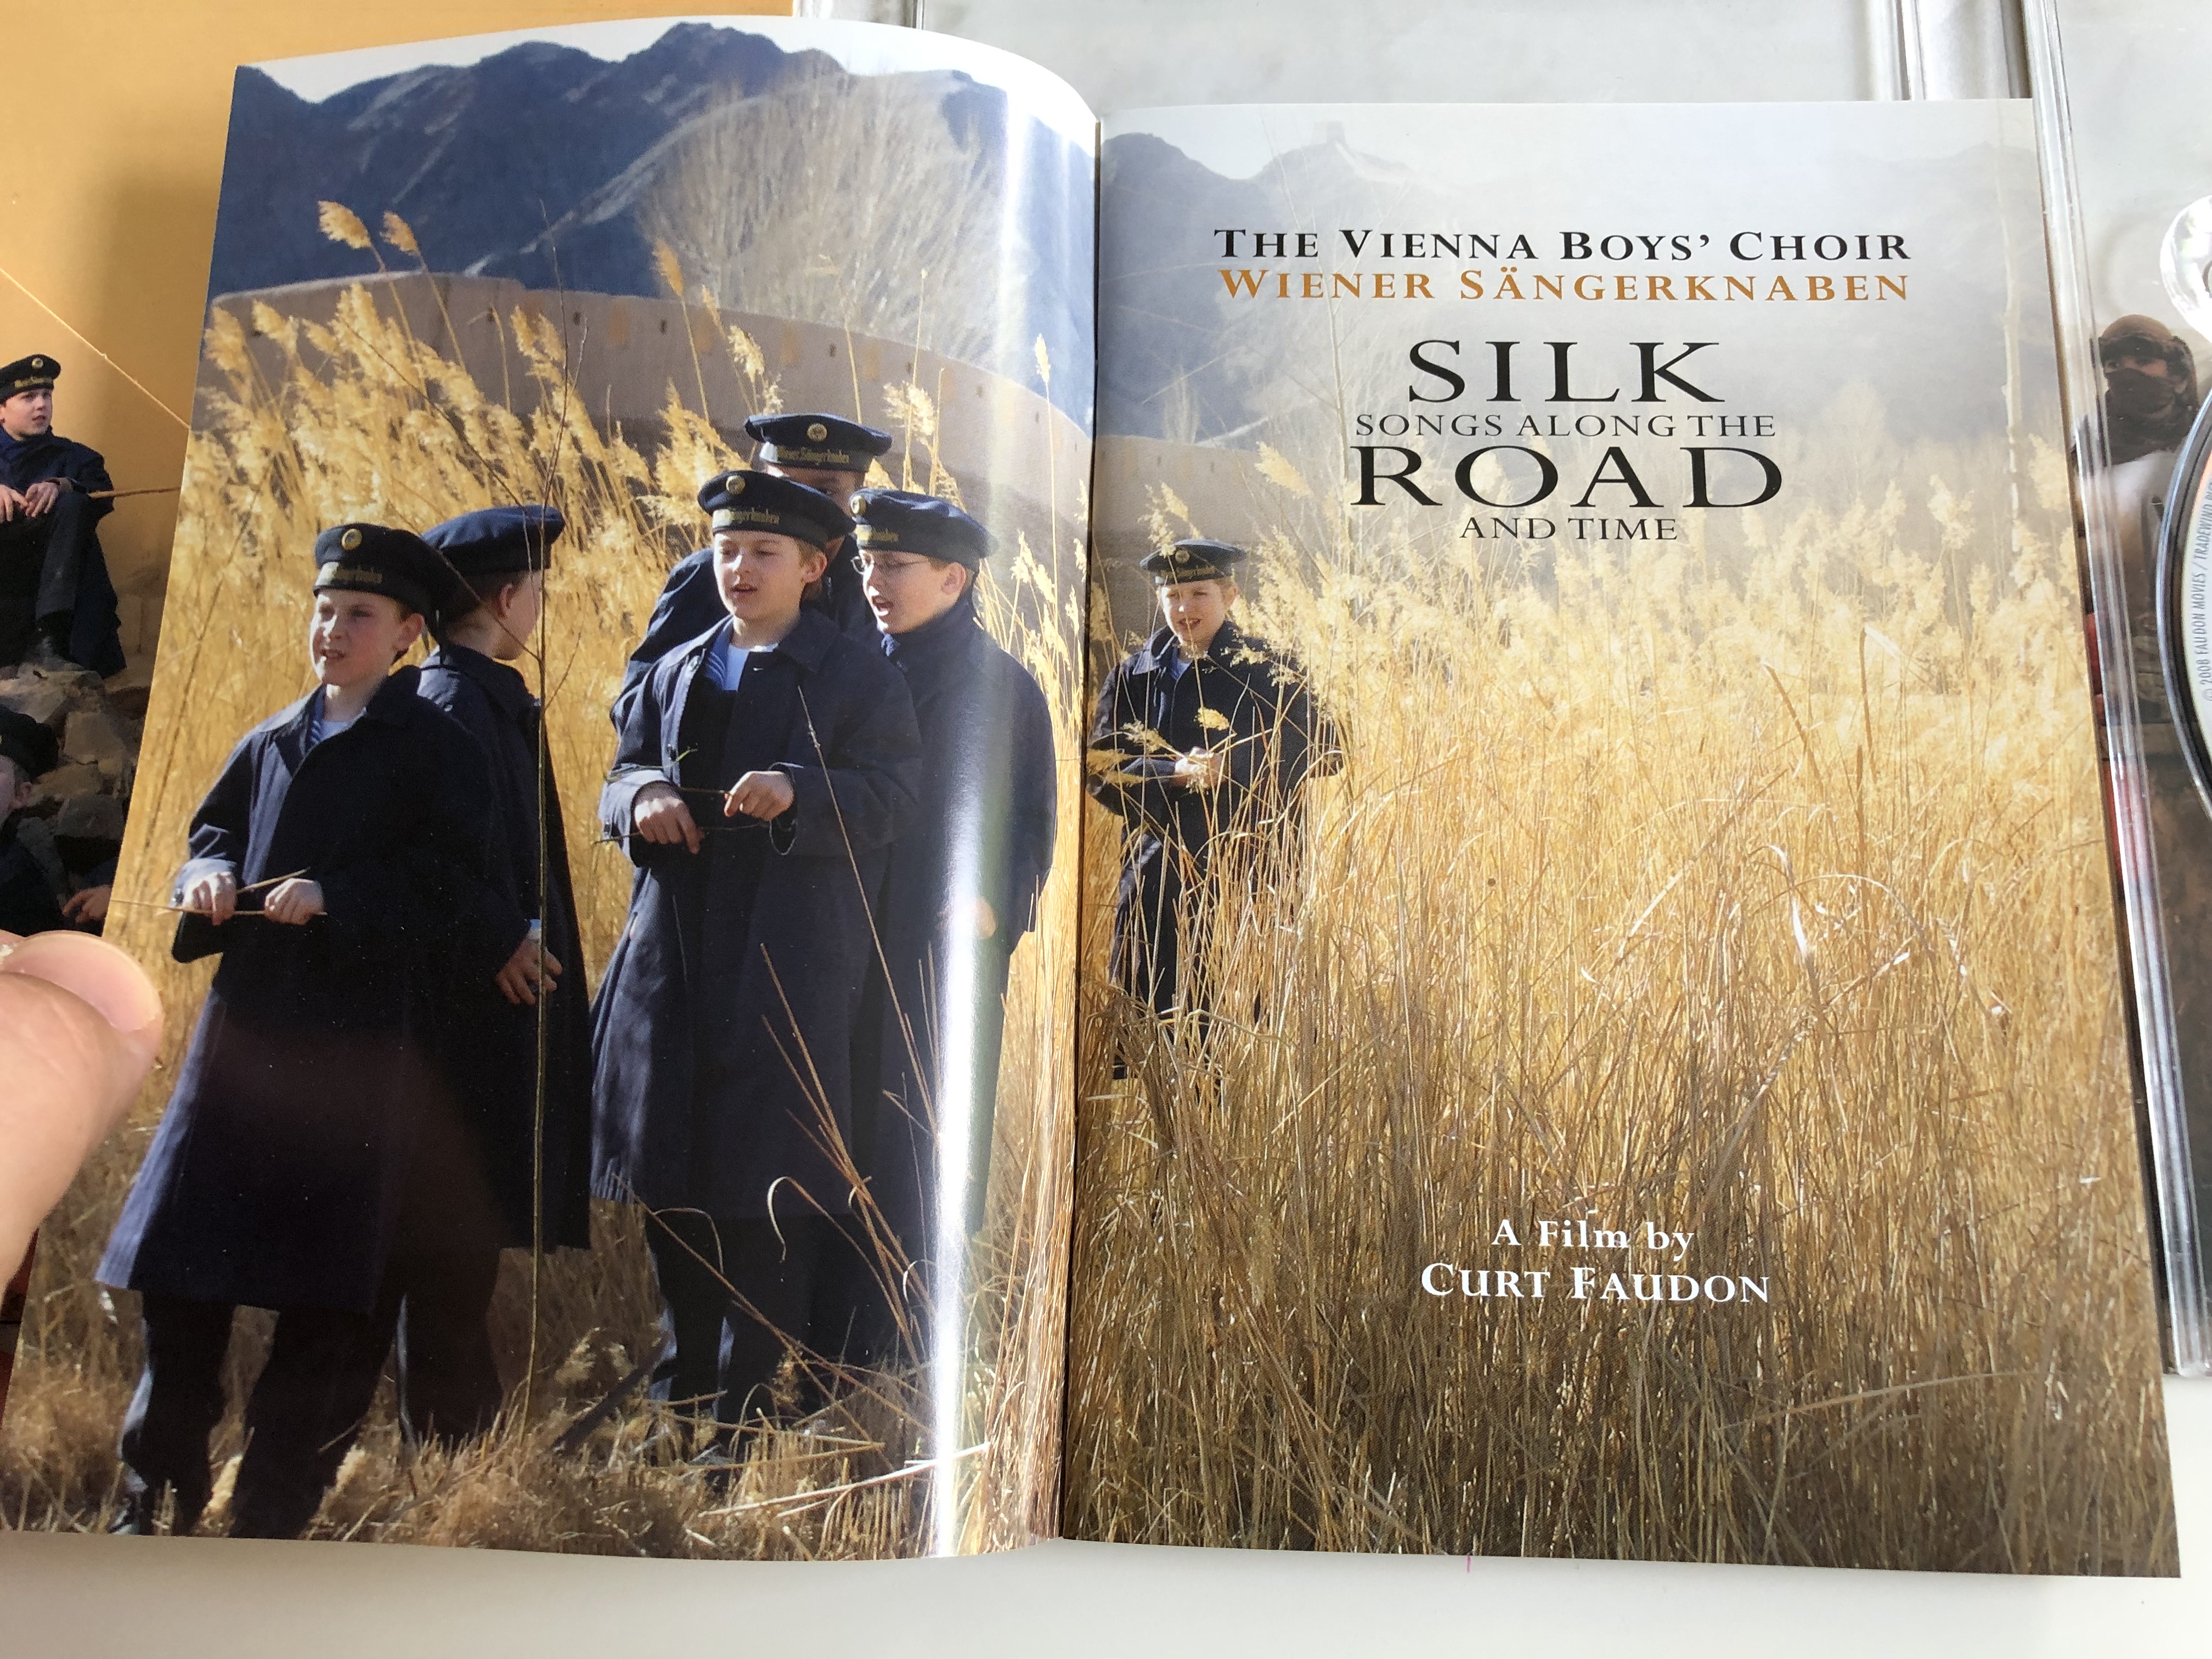 silk-road-songs-along-the-road-and-time-dvd-cd-2008-directed-bt-curt-faudon-the-vienna-boys-choir-chorus-master-janko-zannos-music-by-gerd-schuller-4-.jpg